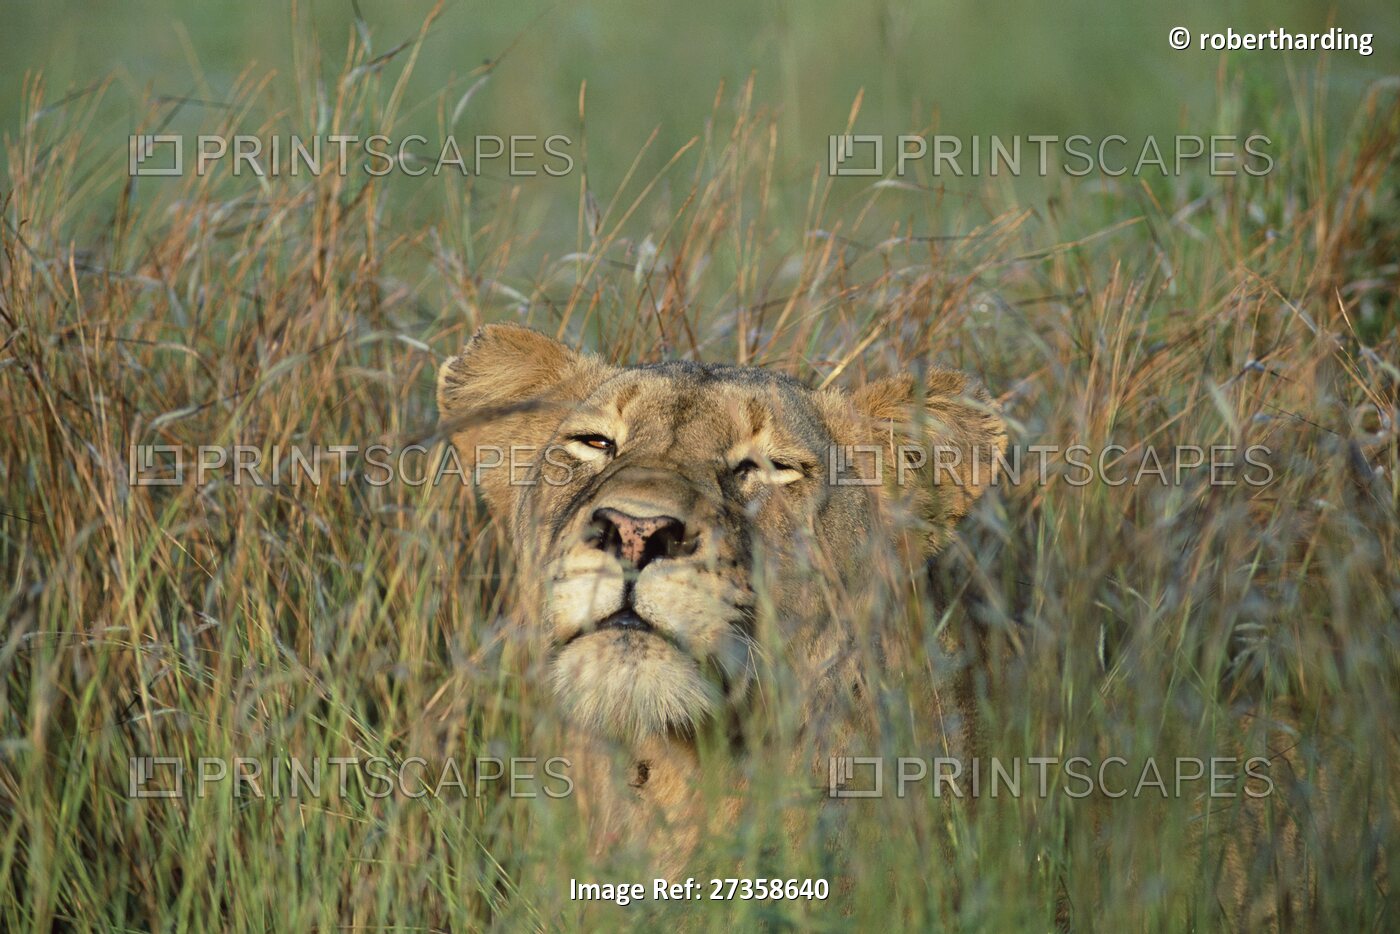 Lioness, Panthera leo, in the grass, Kruger National Park, South Africa, Africa